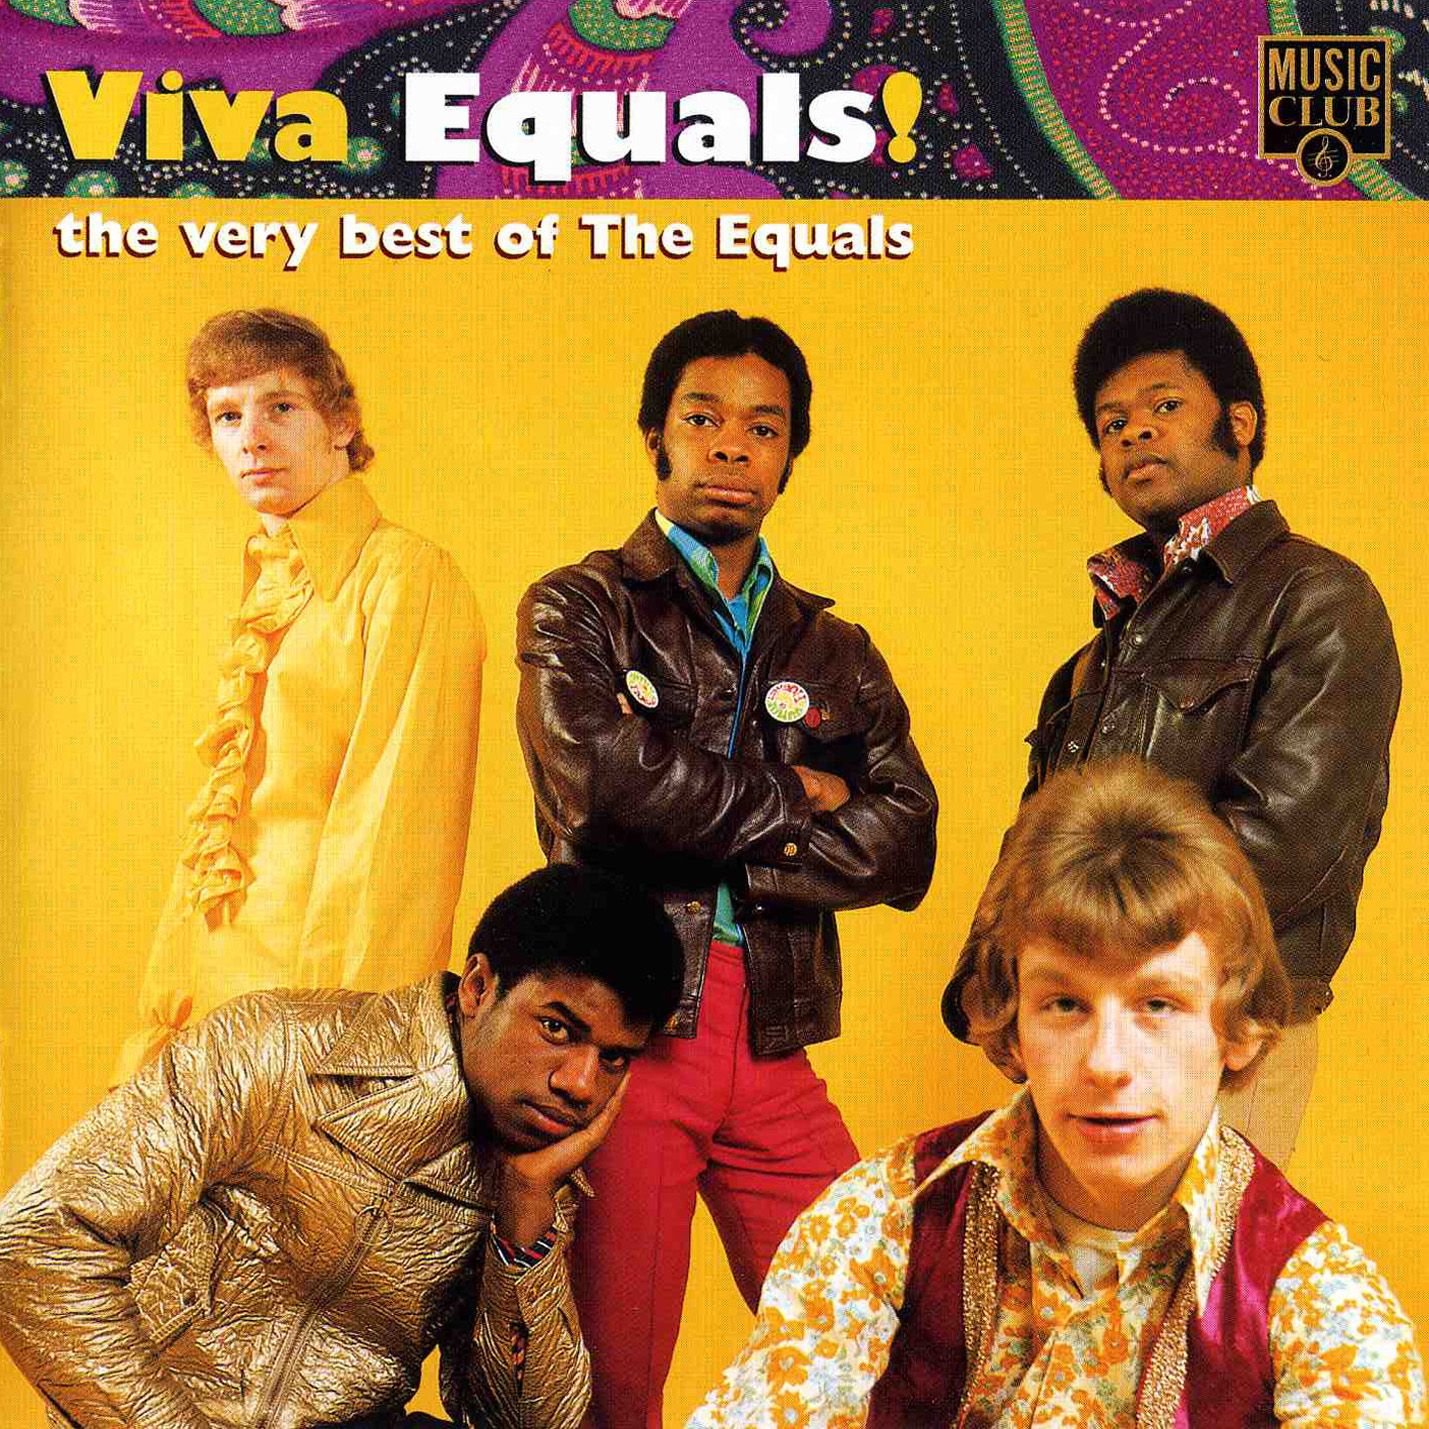 The Equals - The Very Best of The Equals in DTS-HD. (DE ORIGINELE TRACKS)